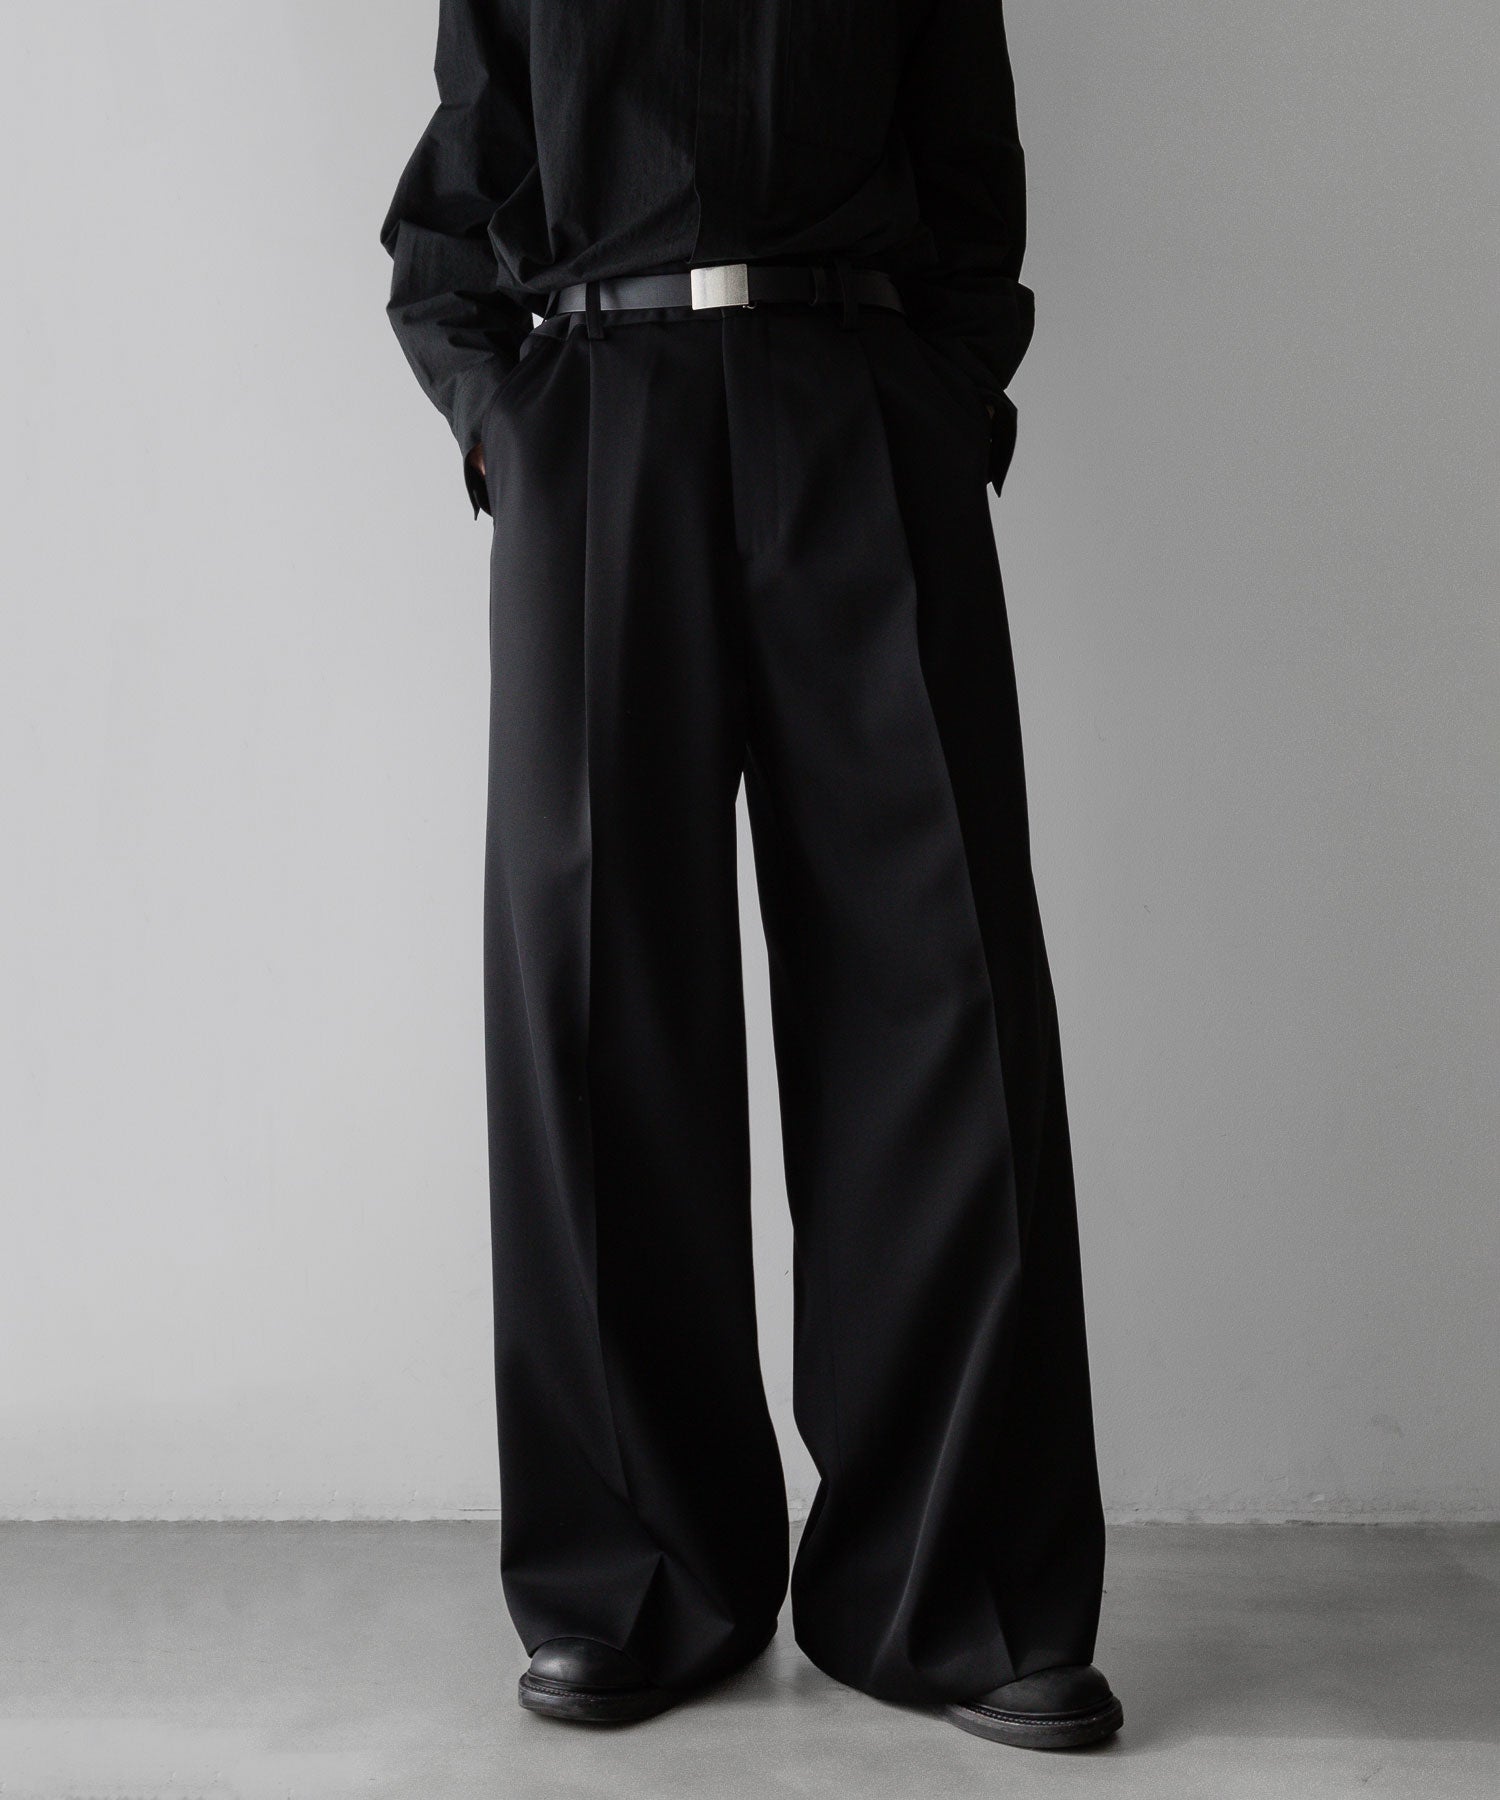 stein / シュタイン】EXTRA WIDE TROUSERS - BLACK | 公式通販サイト